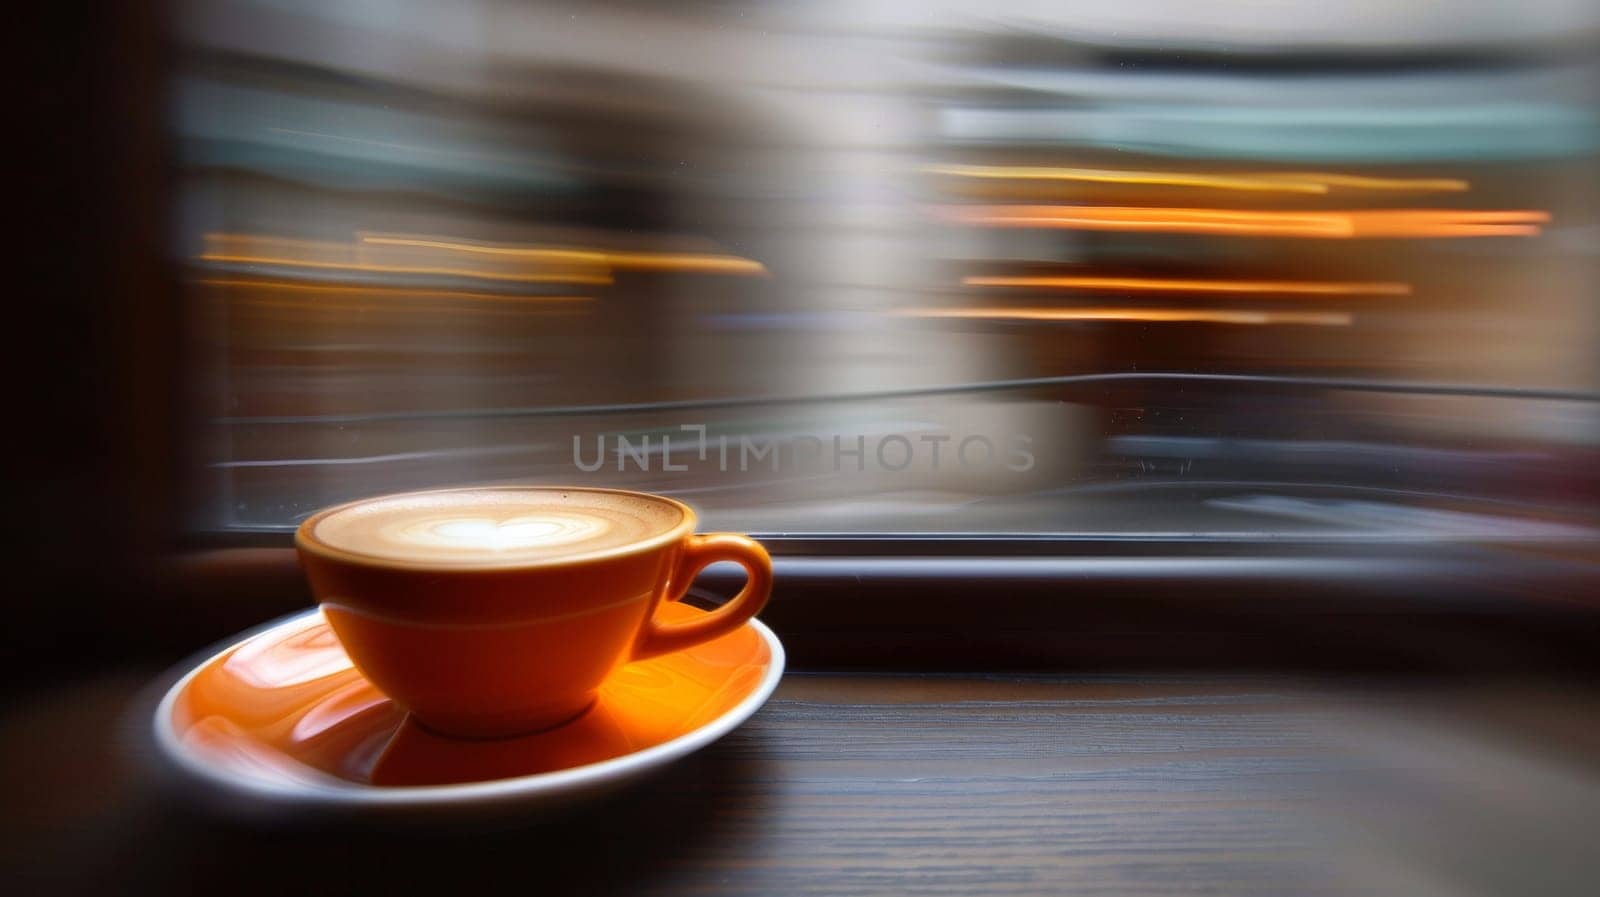 A cup of coffee on saucer sitting in front window, AI by starush